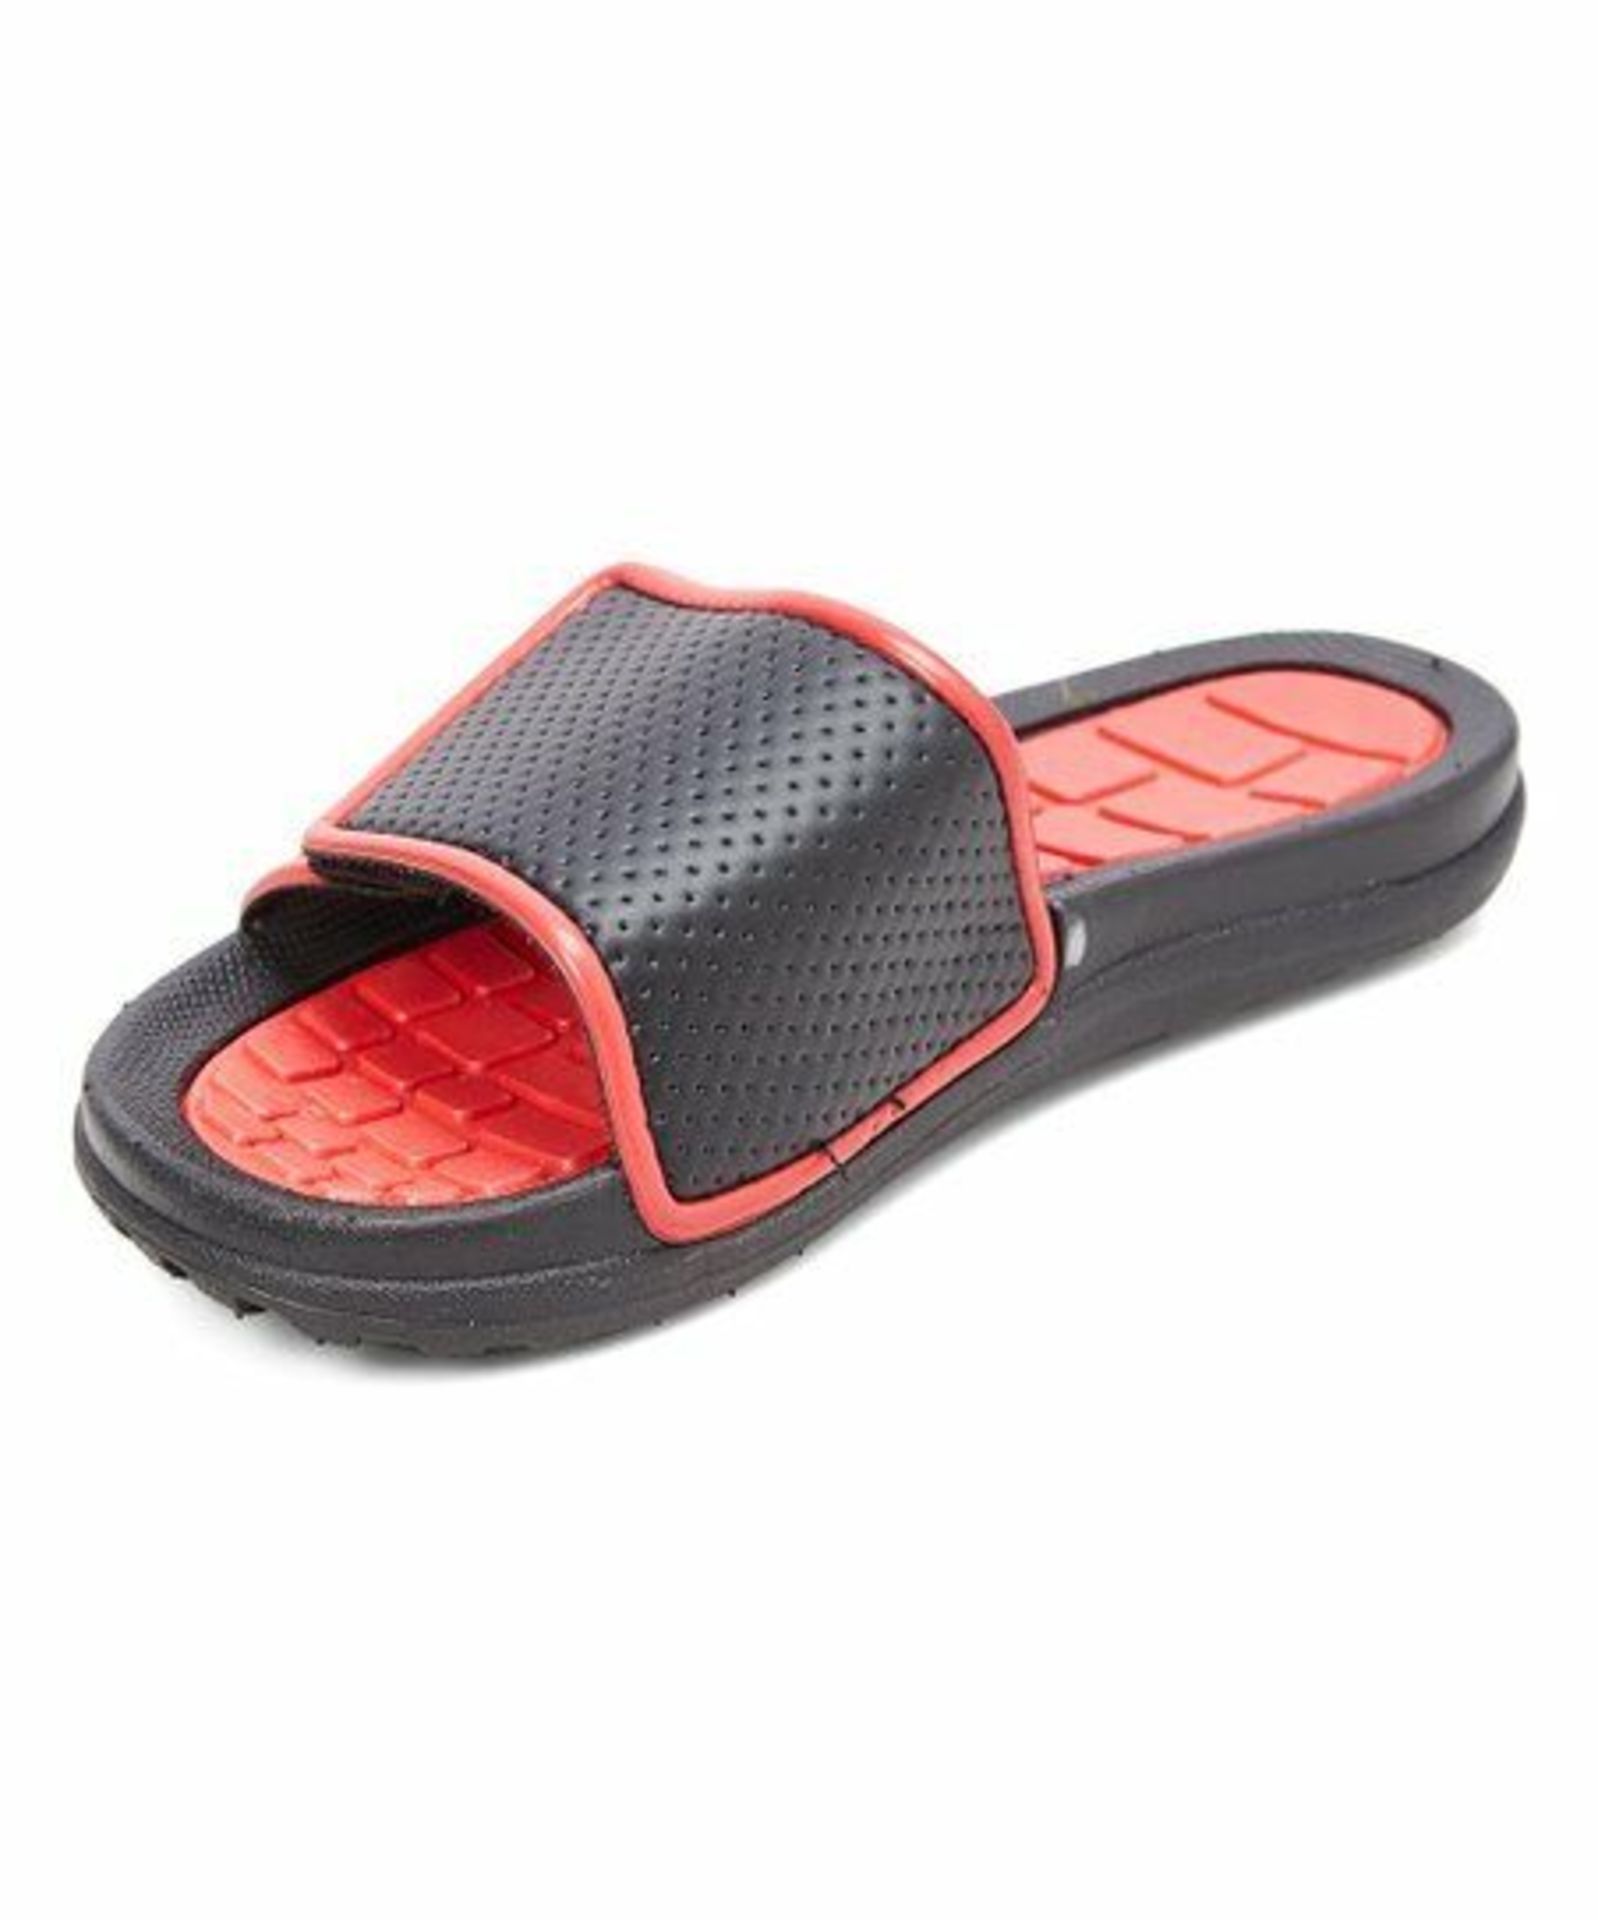 Sky Sole Red Slide Sandal (Uk Size:1/2/Us Size:2/3) (New Without Box) [Ref: 36124316-M-002] - Image 2 of 2